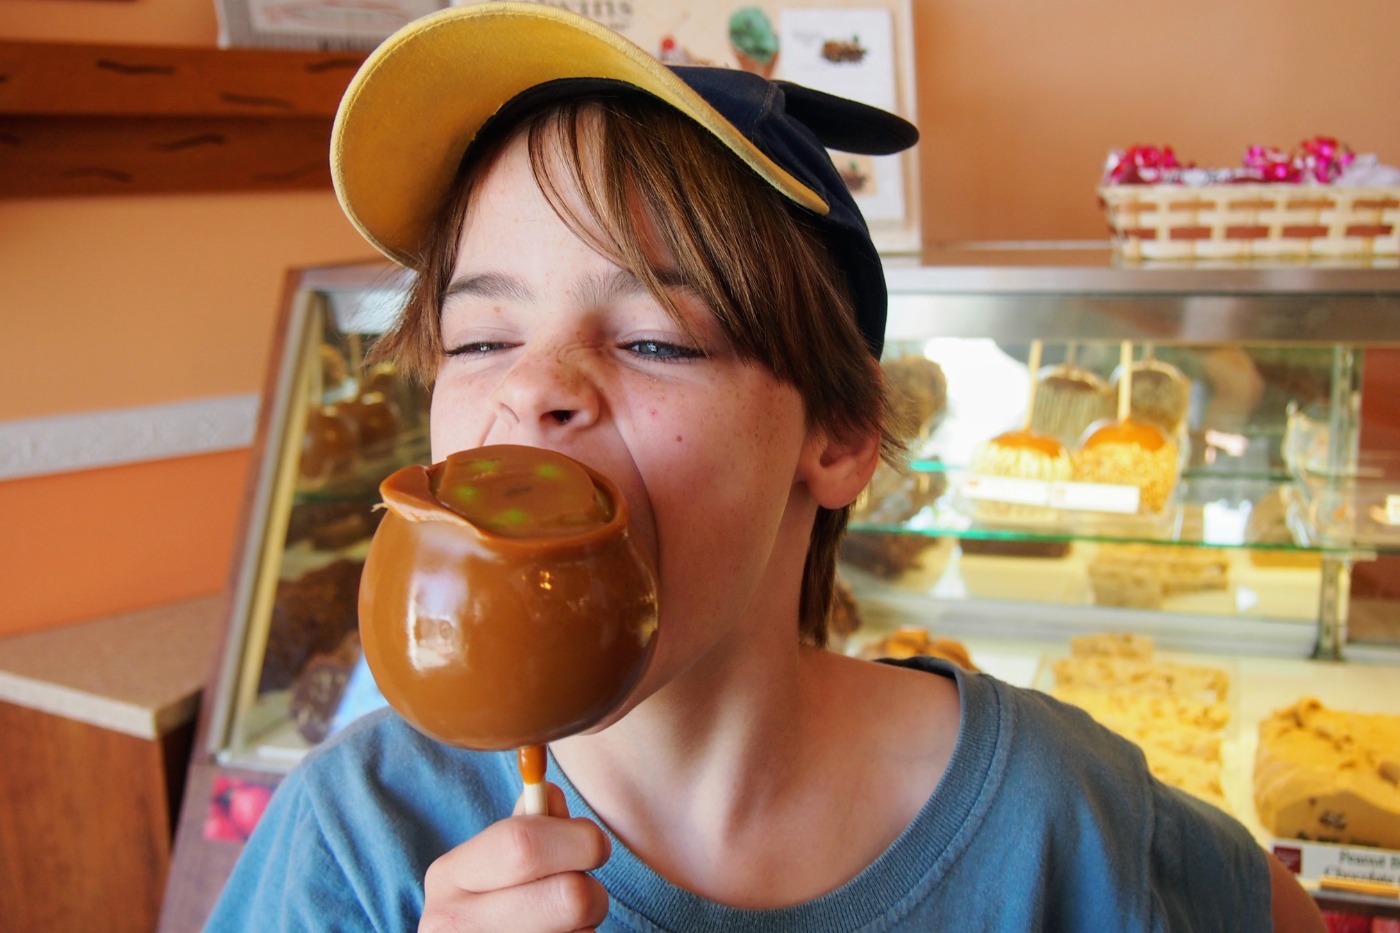 Food highlight from around the world, a candy apple in the USA